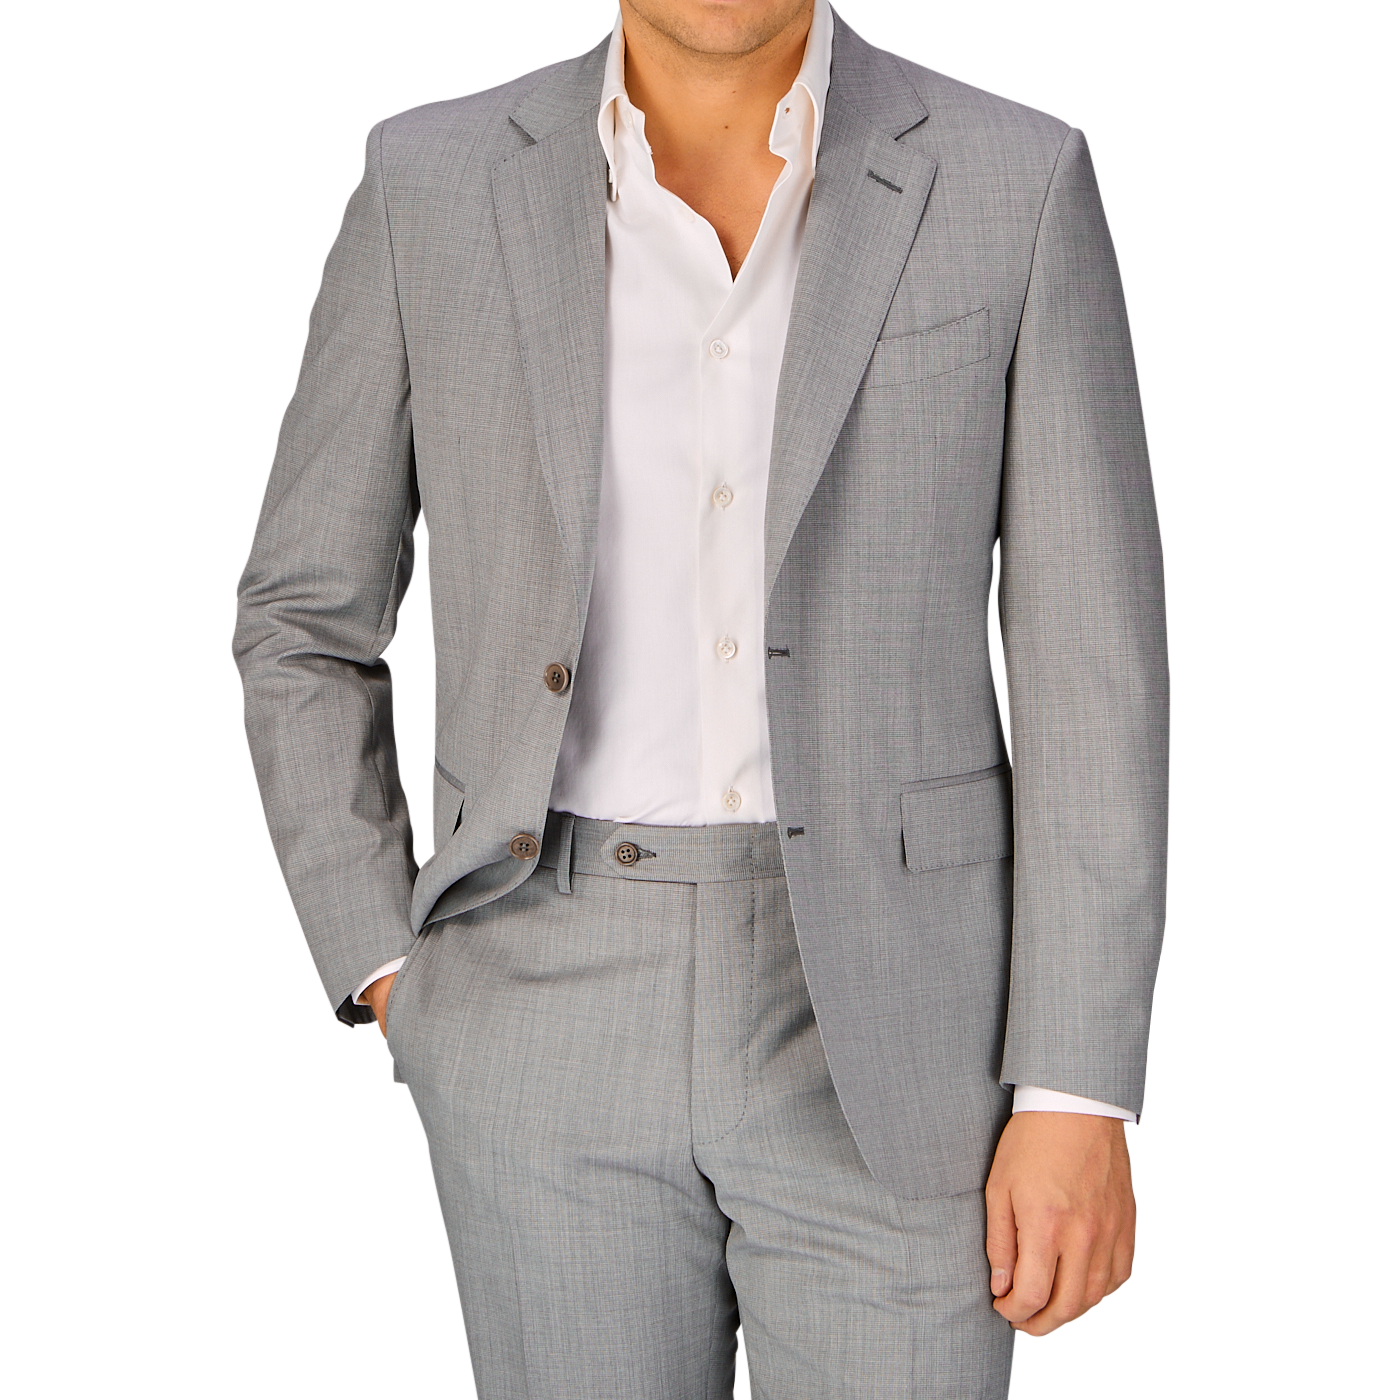 A man wearing a Canali Light Grey Micro Check Wool Suit, featuring full canvas construction and a white shirt with no tie, embodies classic sartorial elegance.